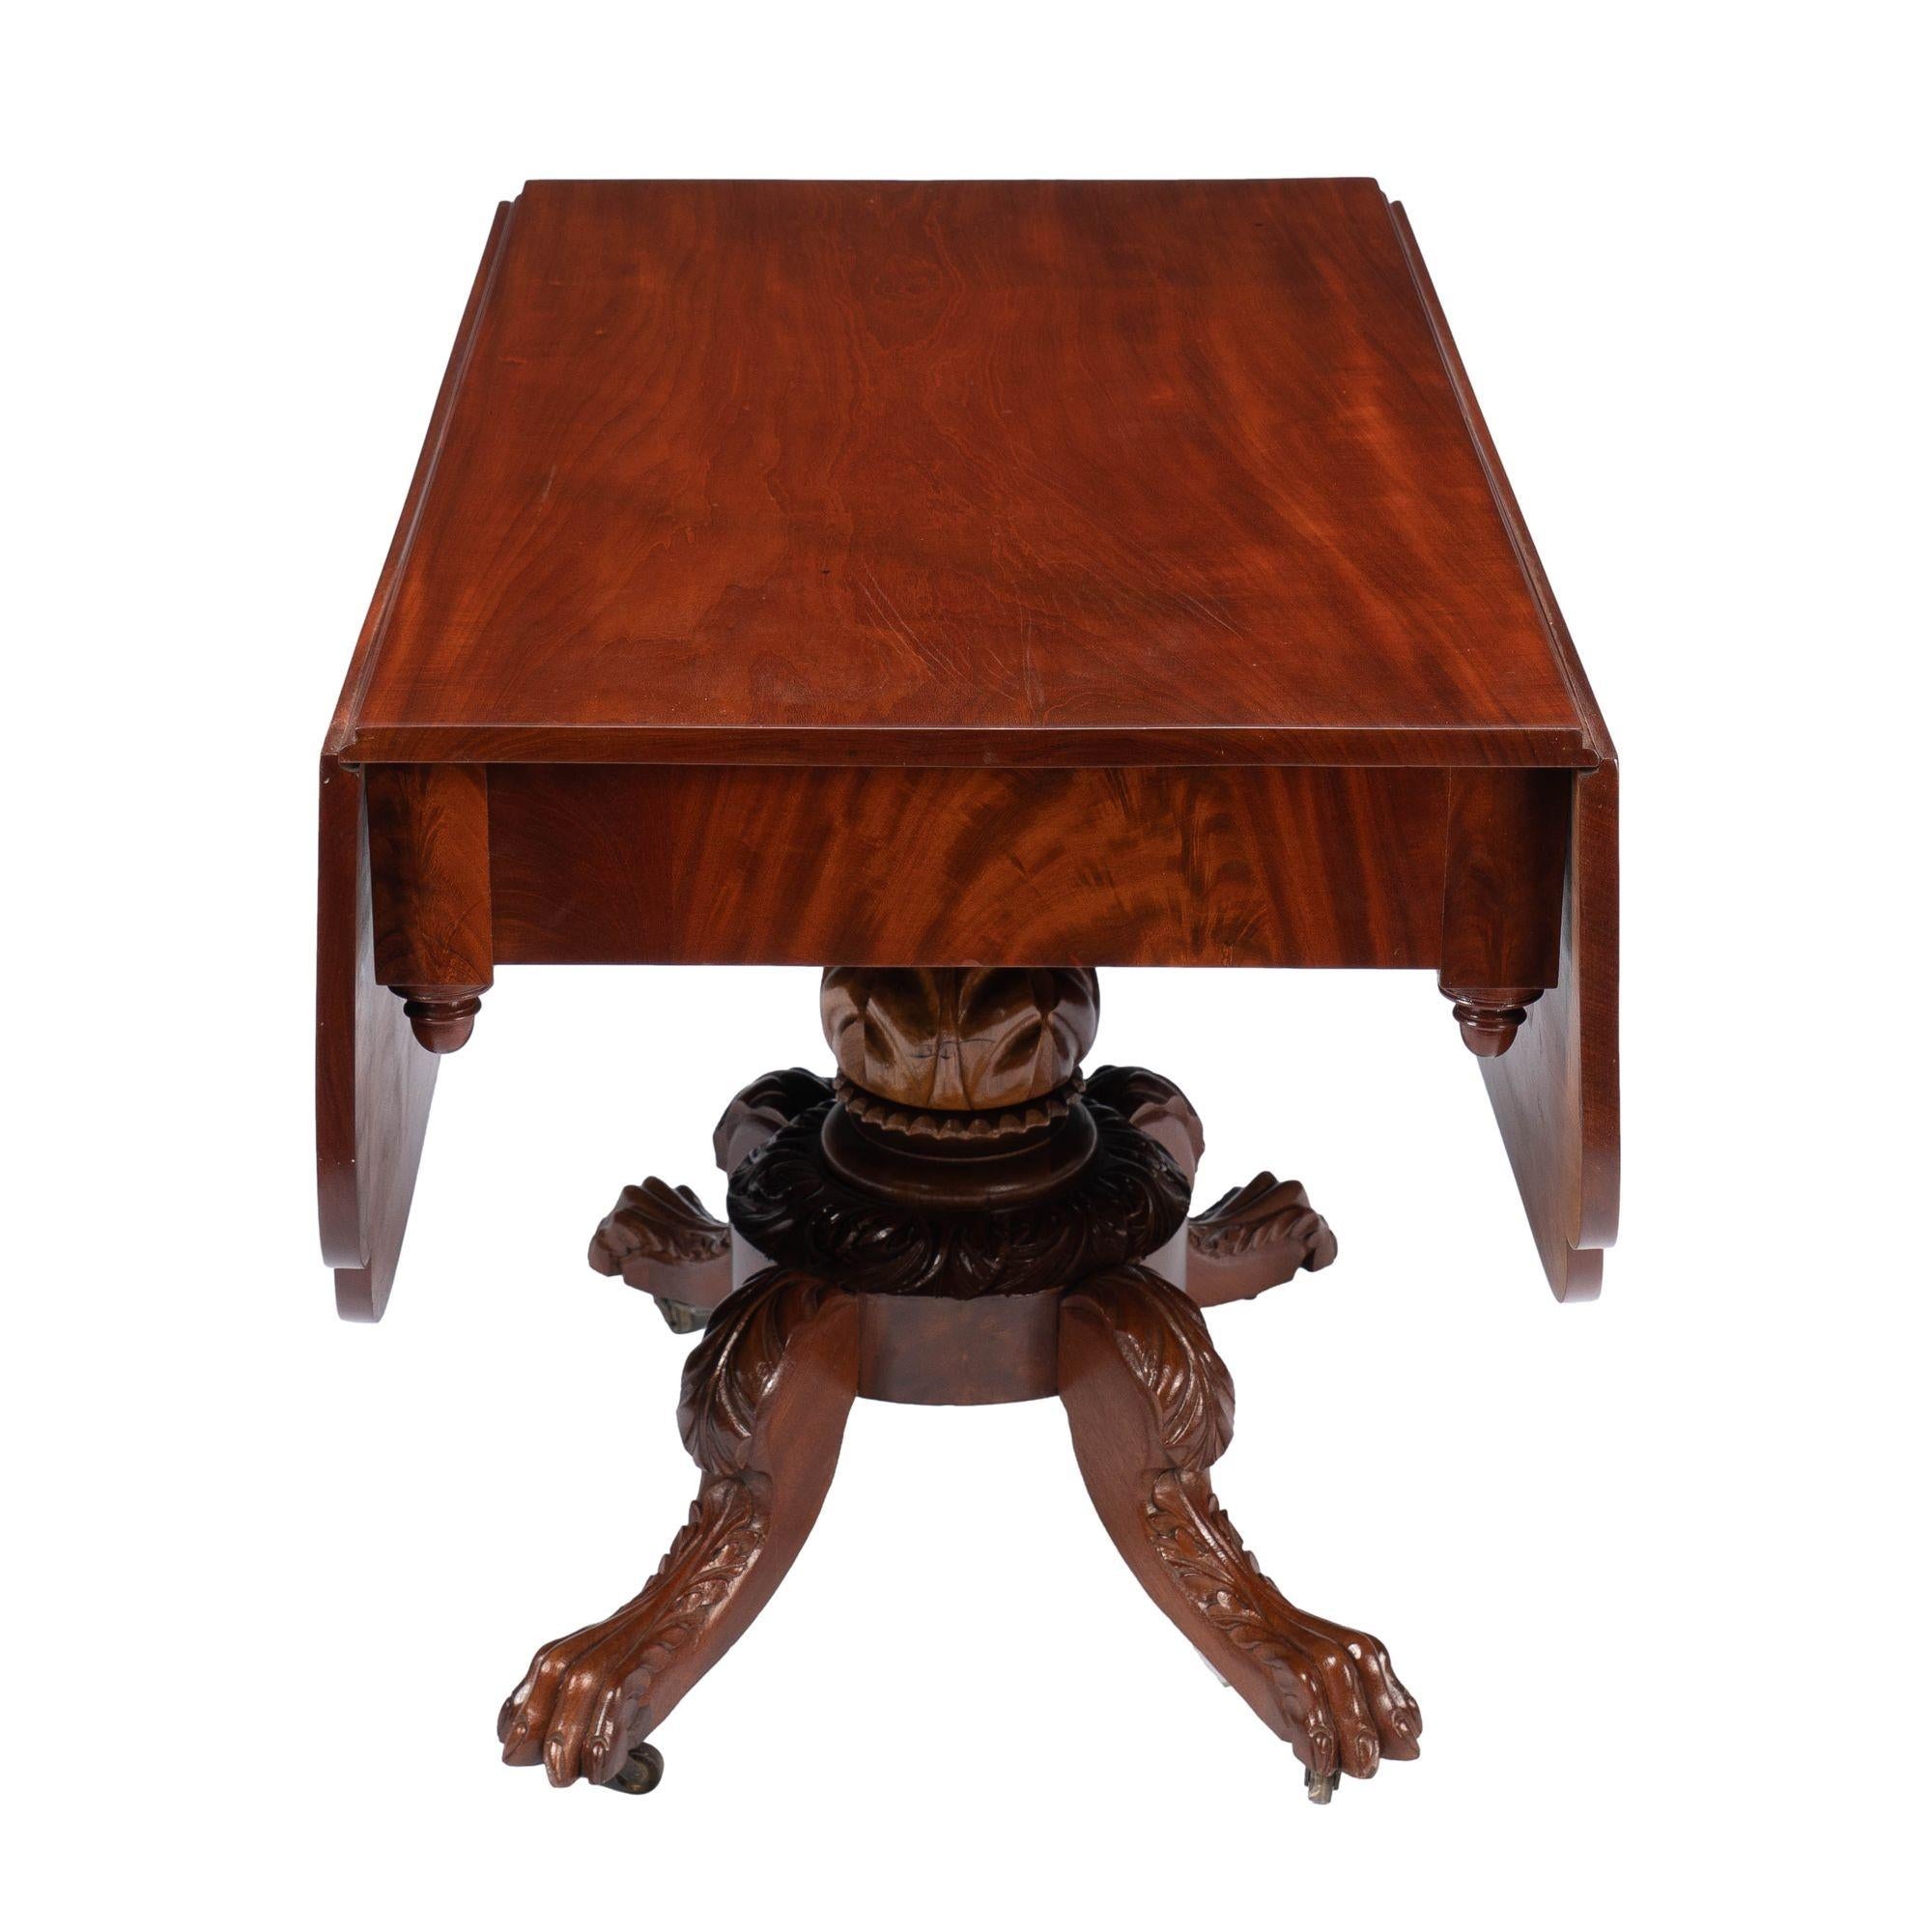 Neoclassical New York Neoclassic Drop Leaf Breakfast Table, c. 1825 For Sale